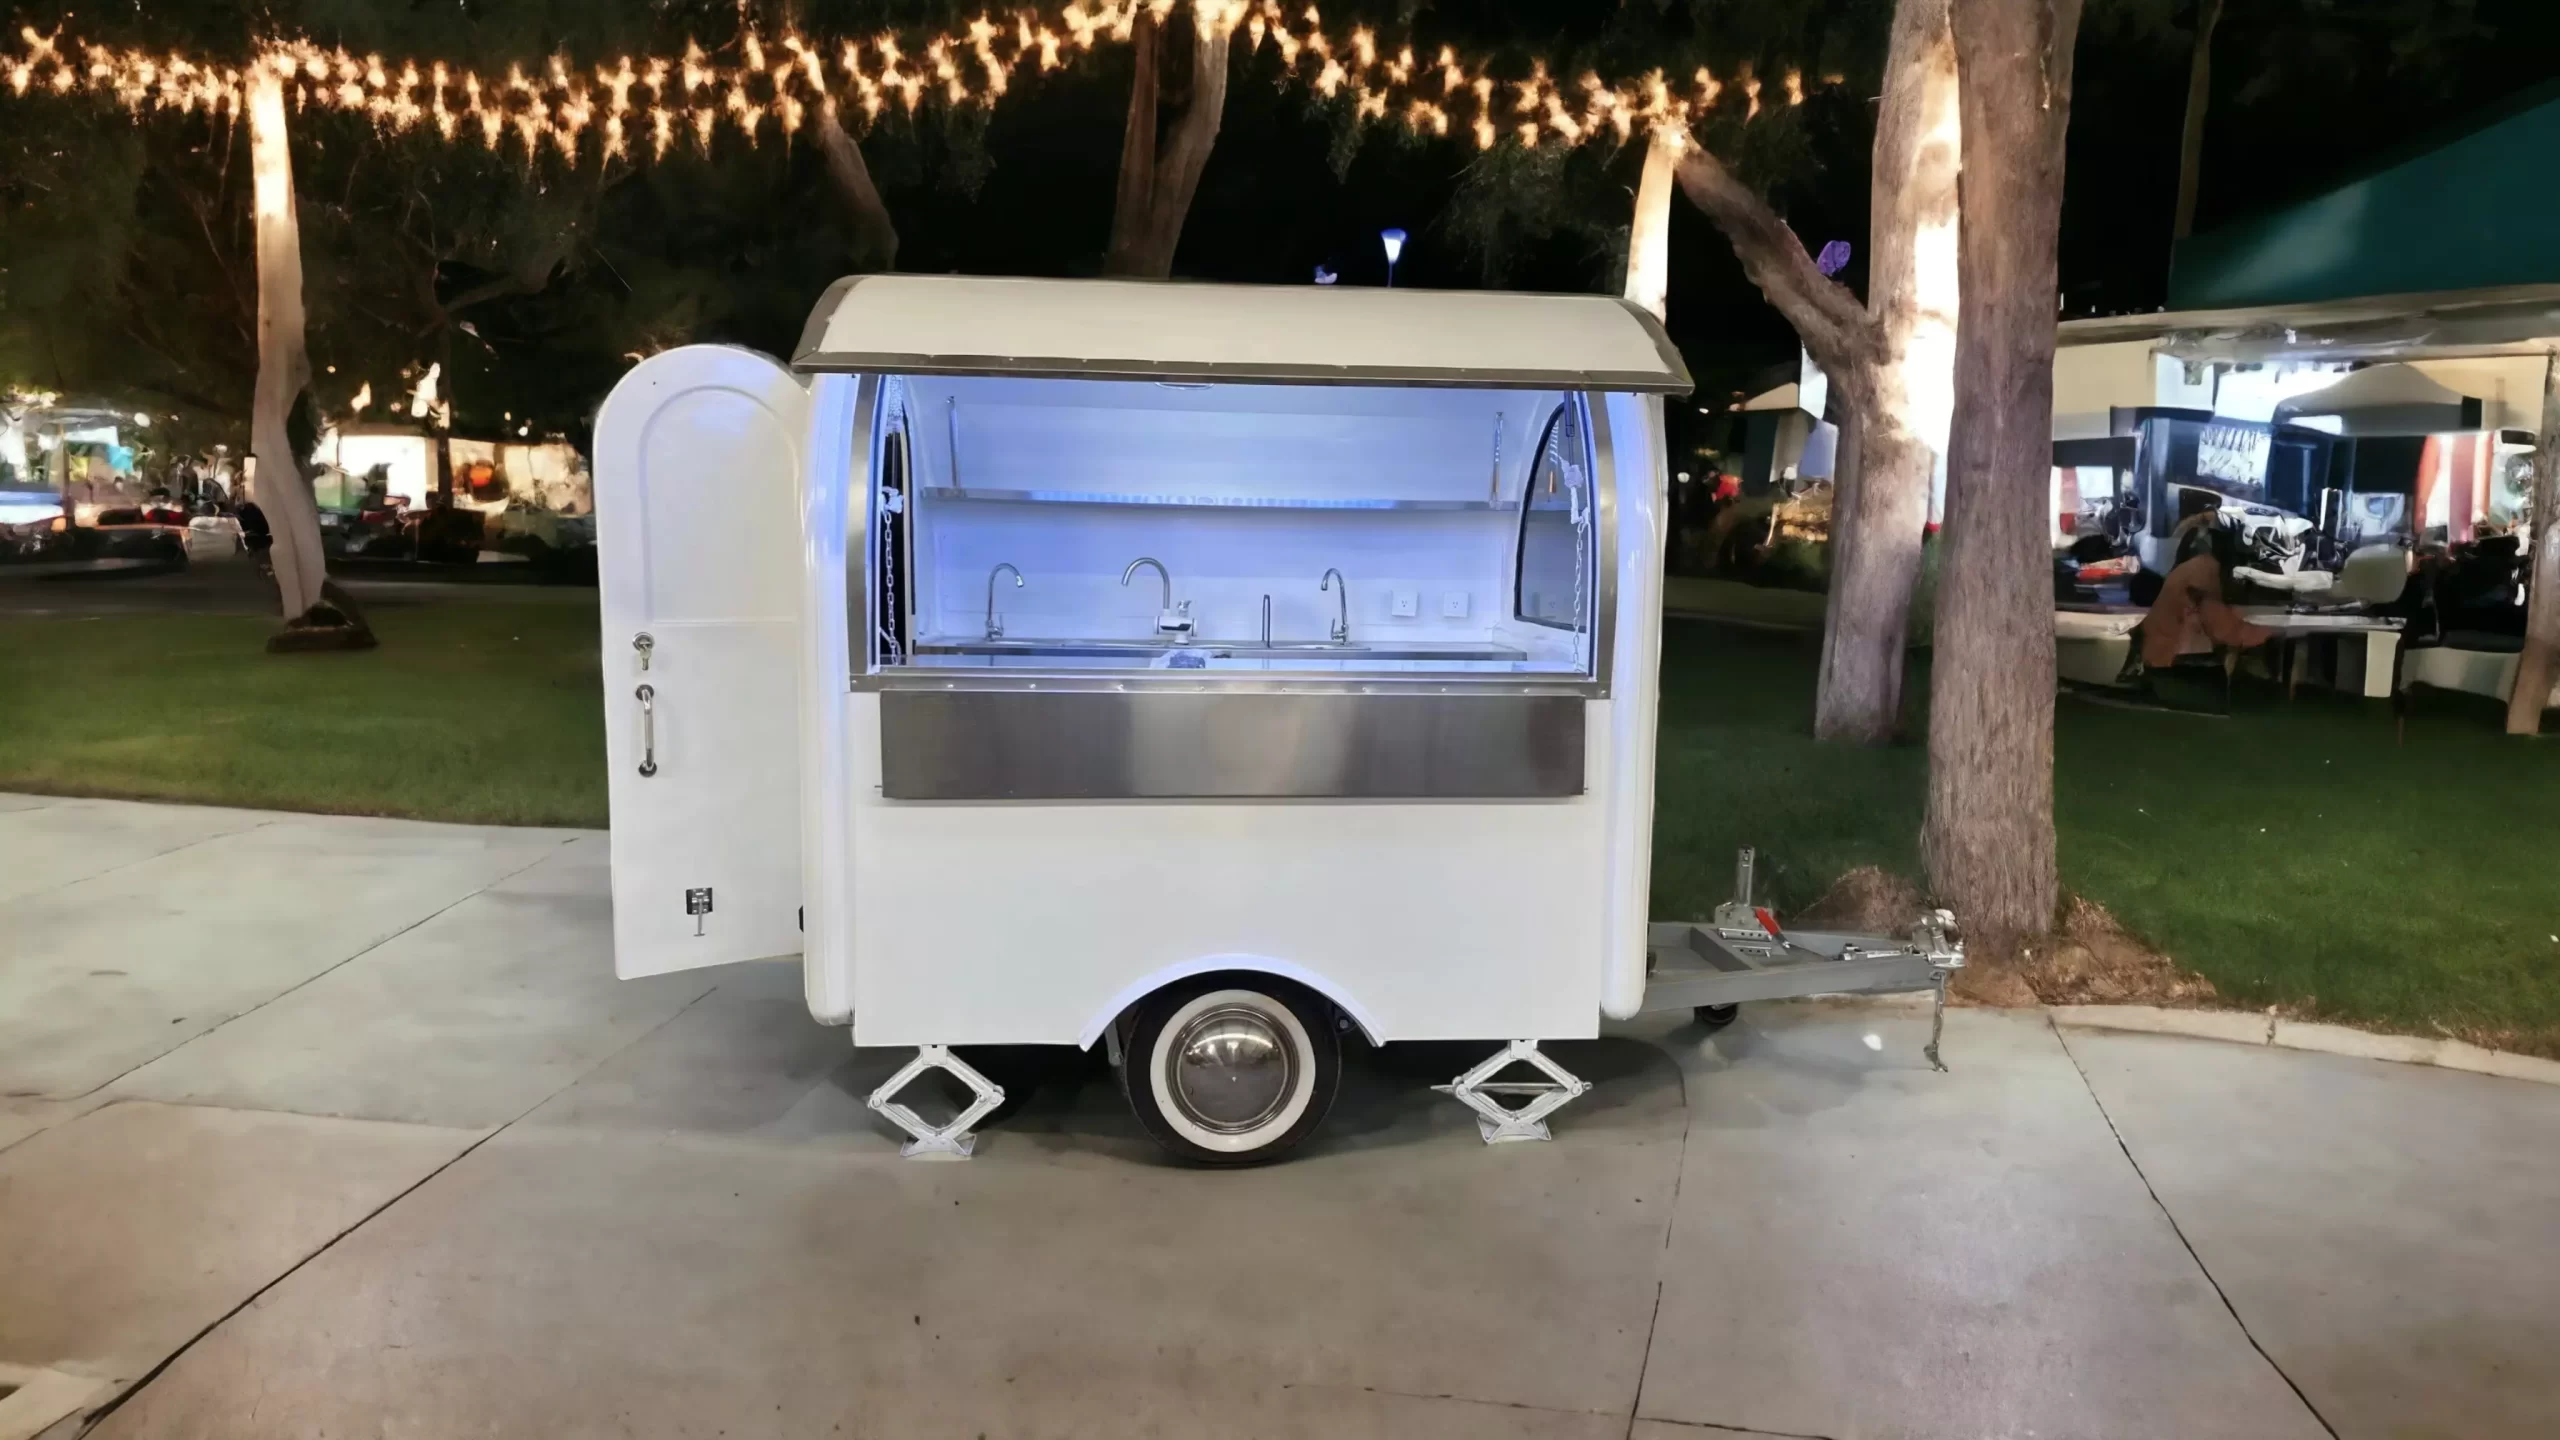 Discover the perfect Food Truck for Sale in the USA - the Best La Cocina Food Trailer with Italian Retro Charm. Our versatile food truck offers Taco, Hot Dog, Tamales, Coffee, Ice Cream and more. Equipped with 3 sinks, a fryer, and a rain protection system, it's a complete mobile kitchen. Explore this unique opportunity now from Trailer Concept